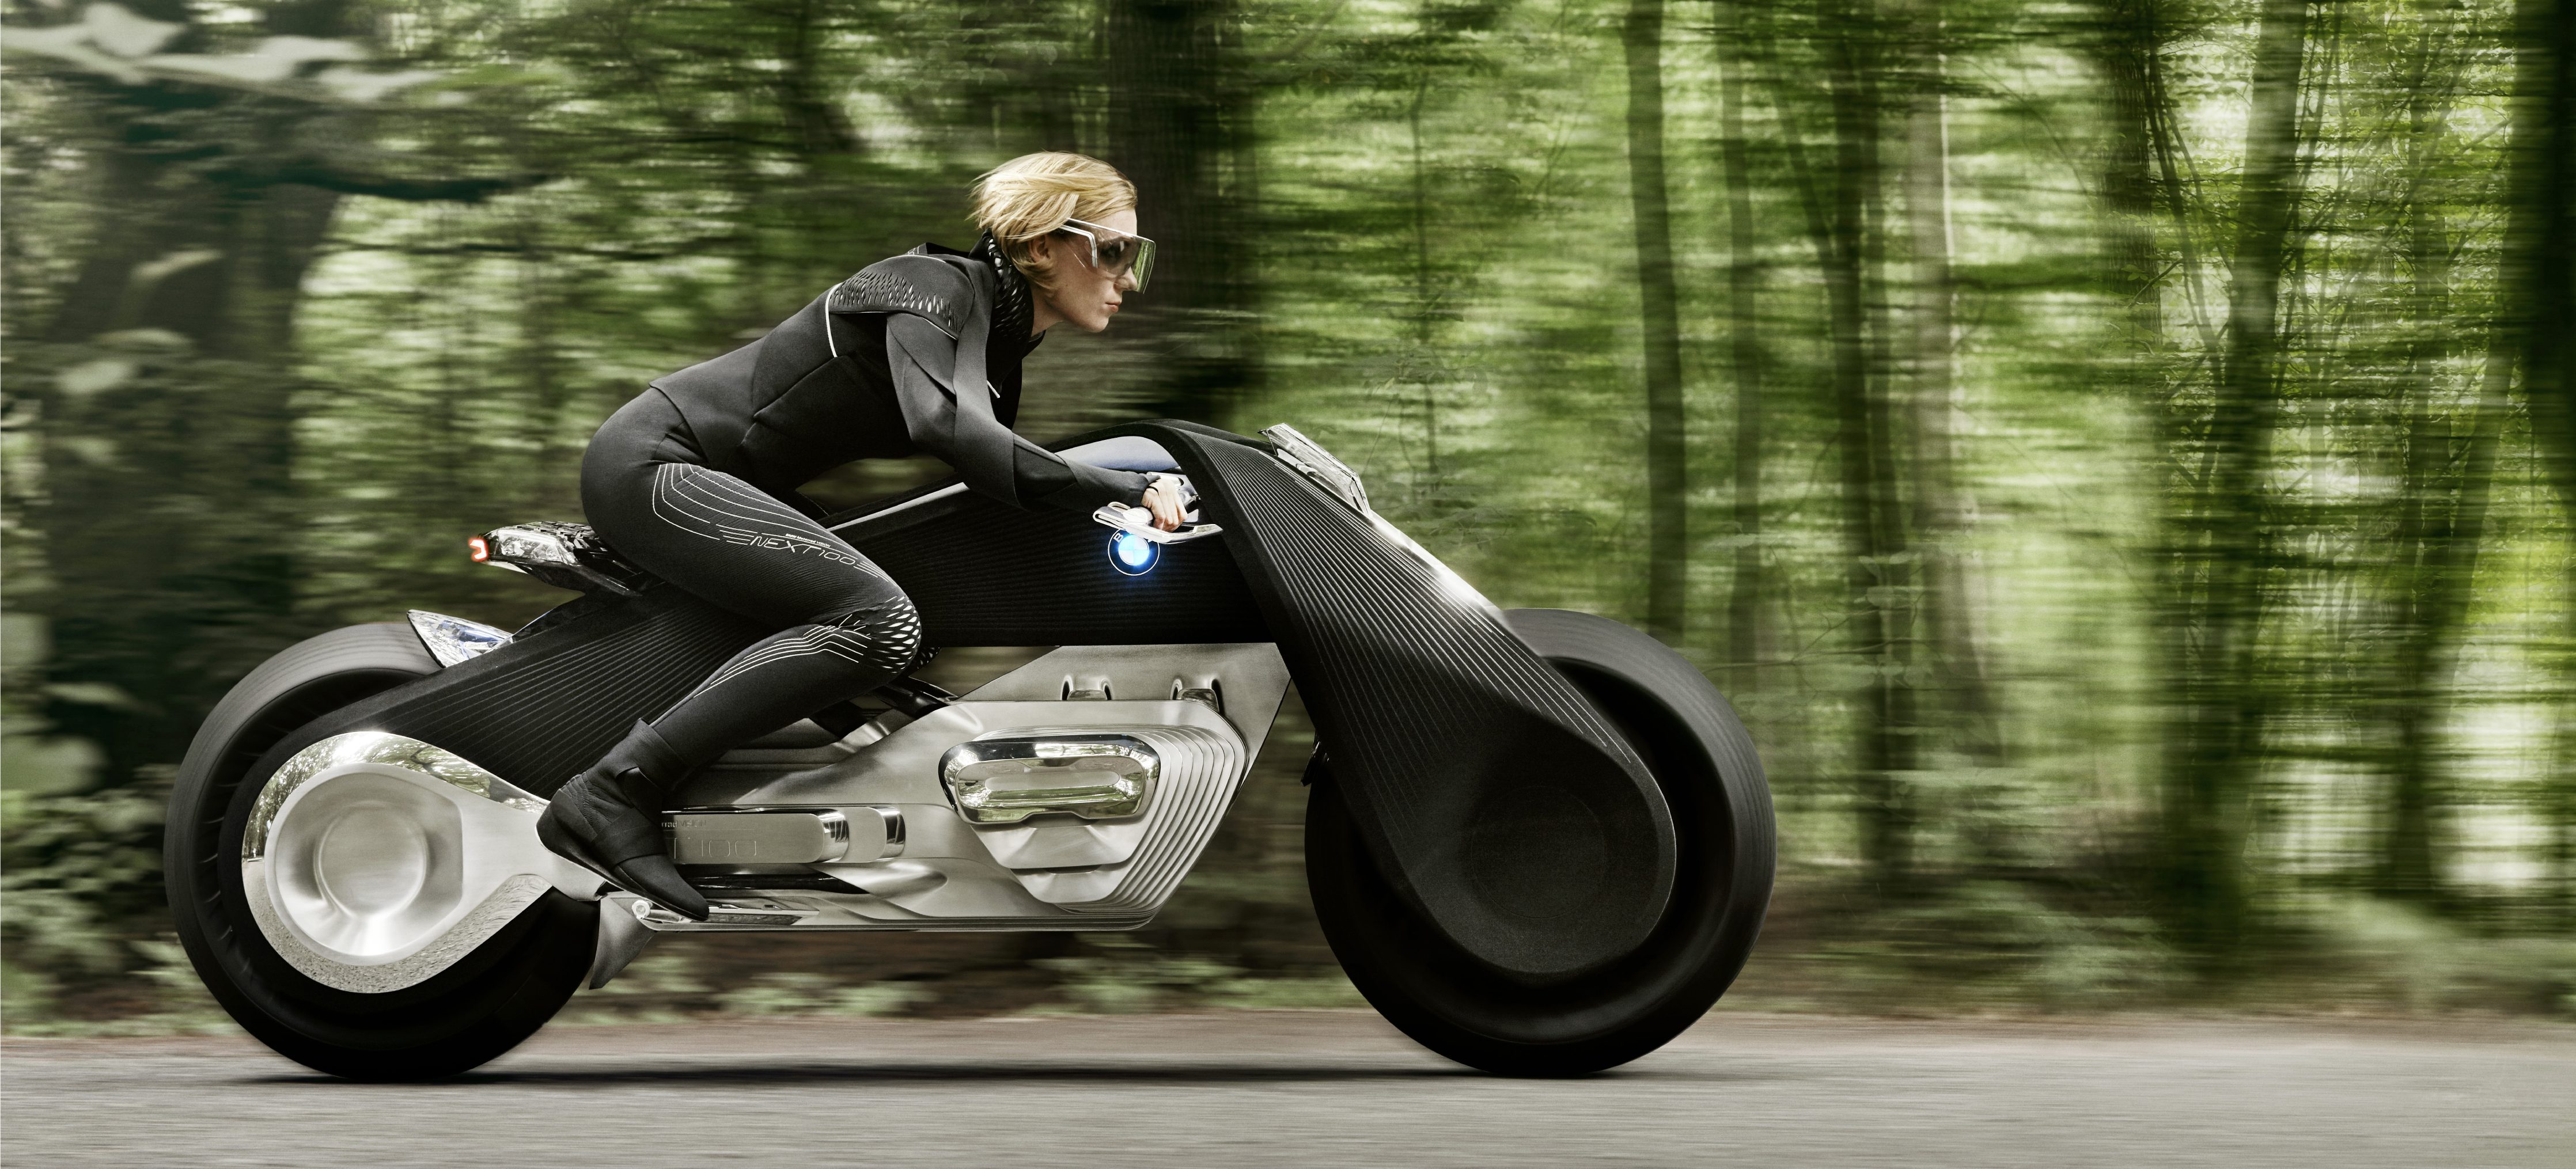 BMW unveils new self-balancing electric motorcycle concept amid rumored